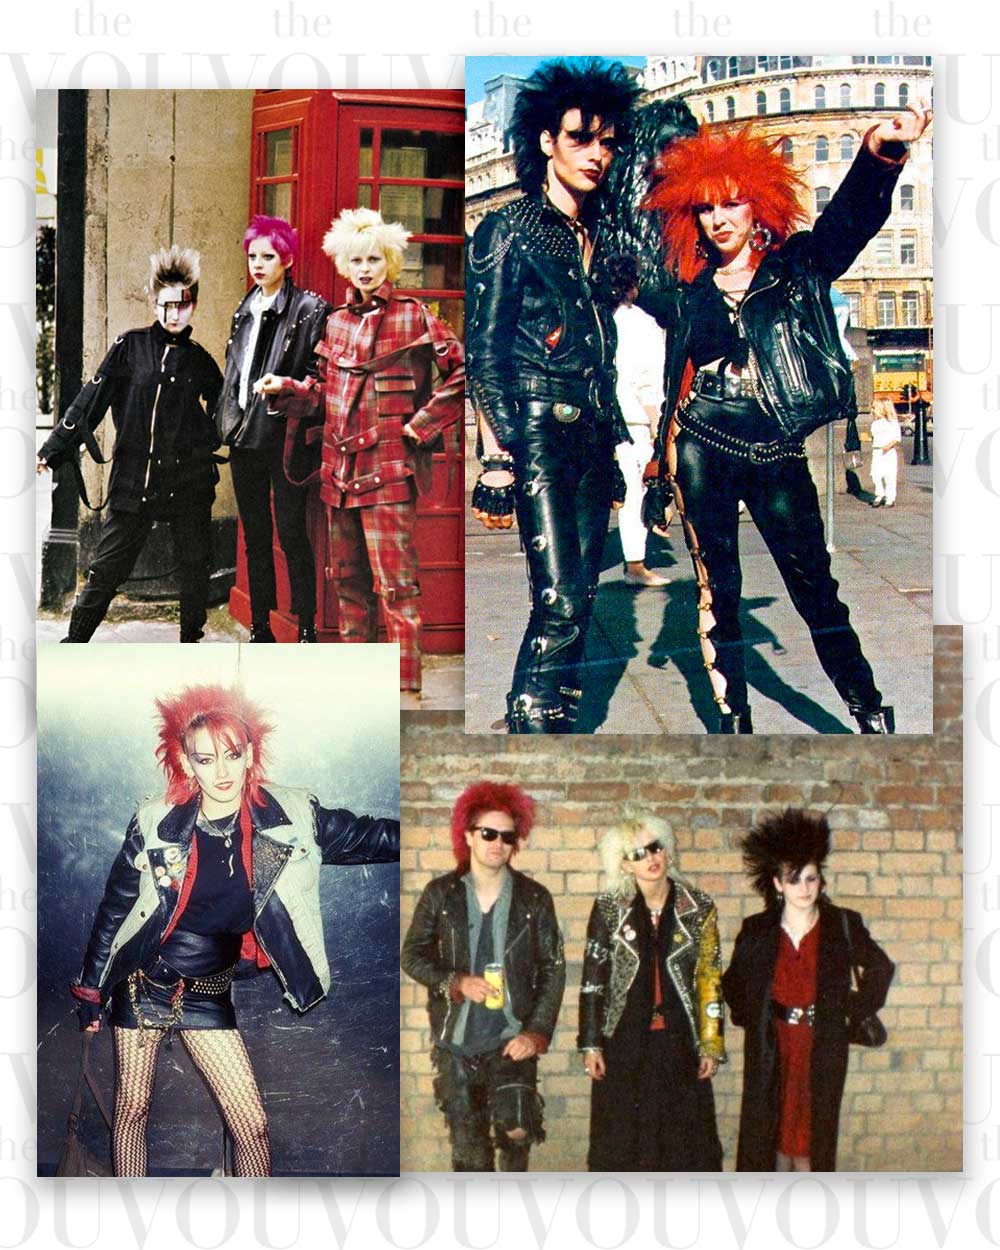 80s Post-punk fashion and styles